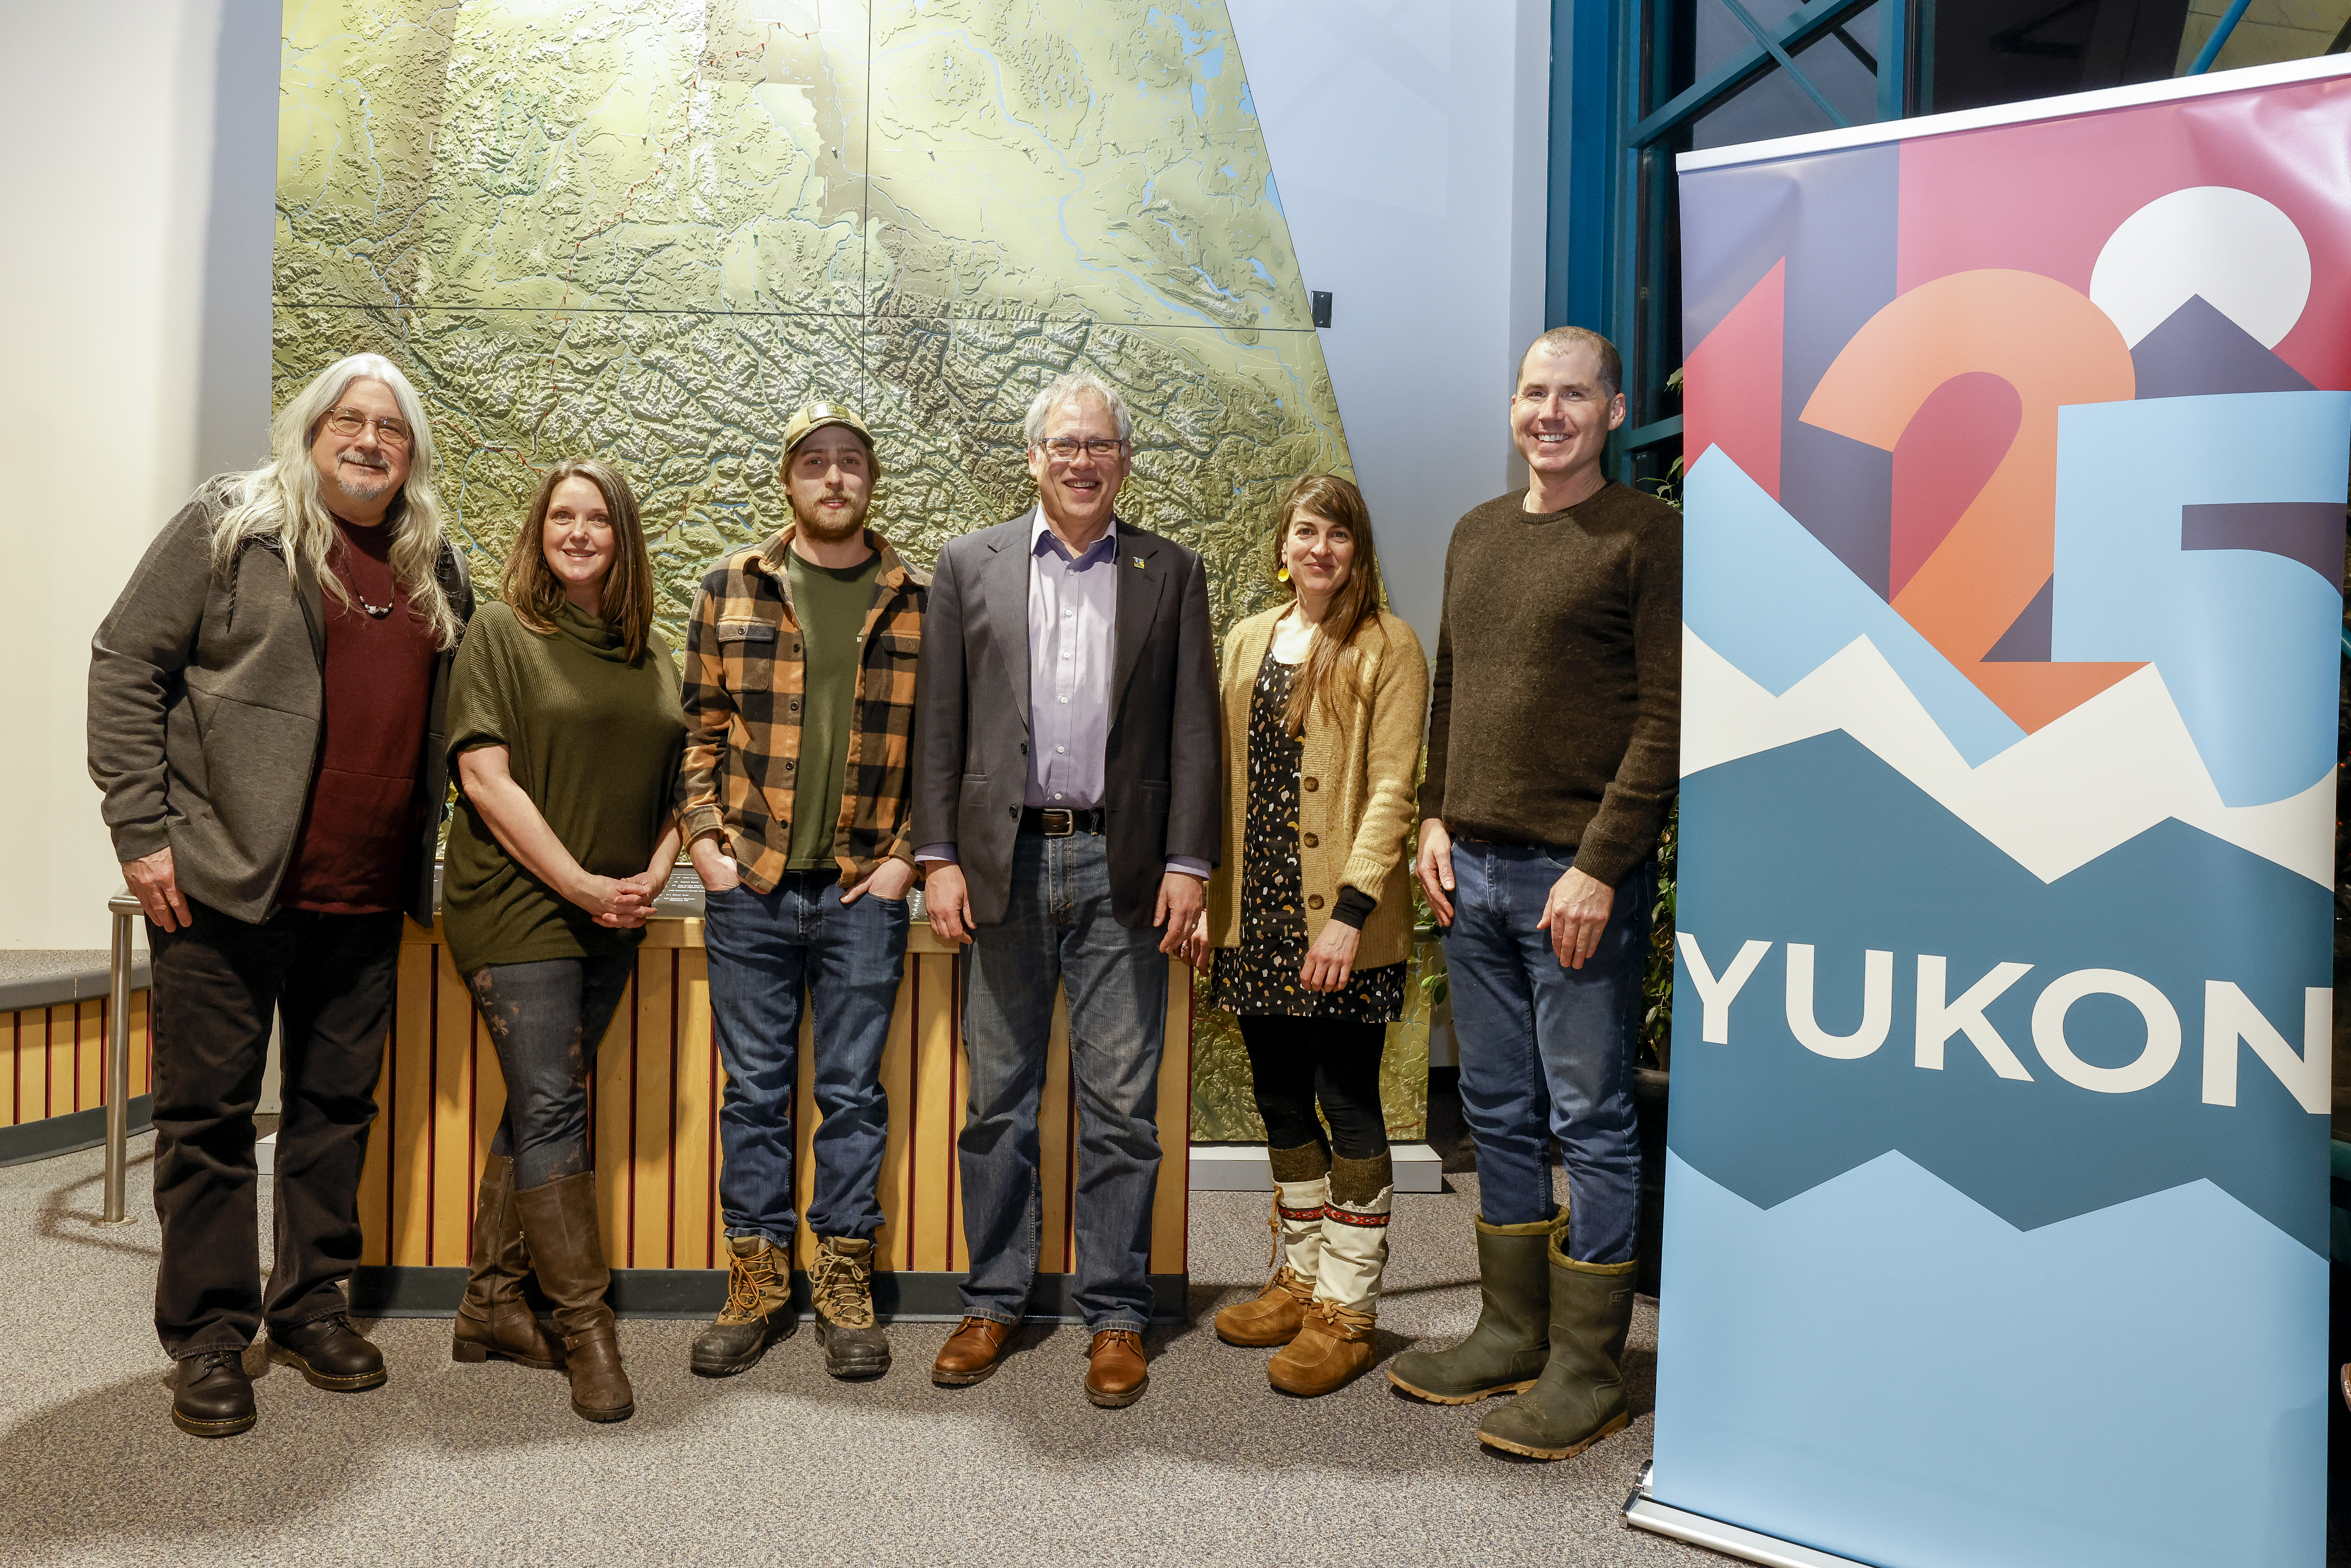 Yukon 125 prize winners standing with minister of tourism and culture